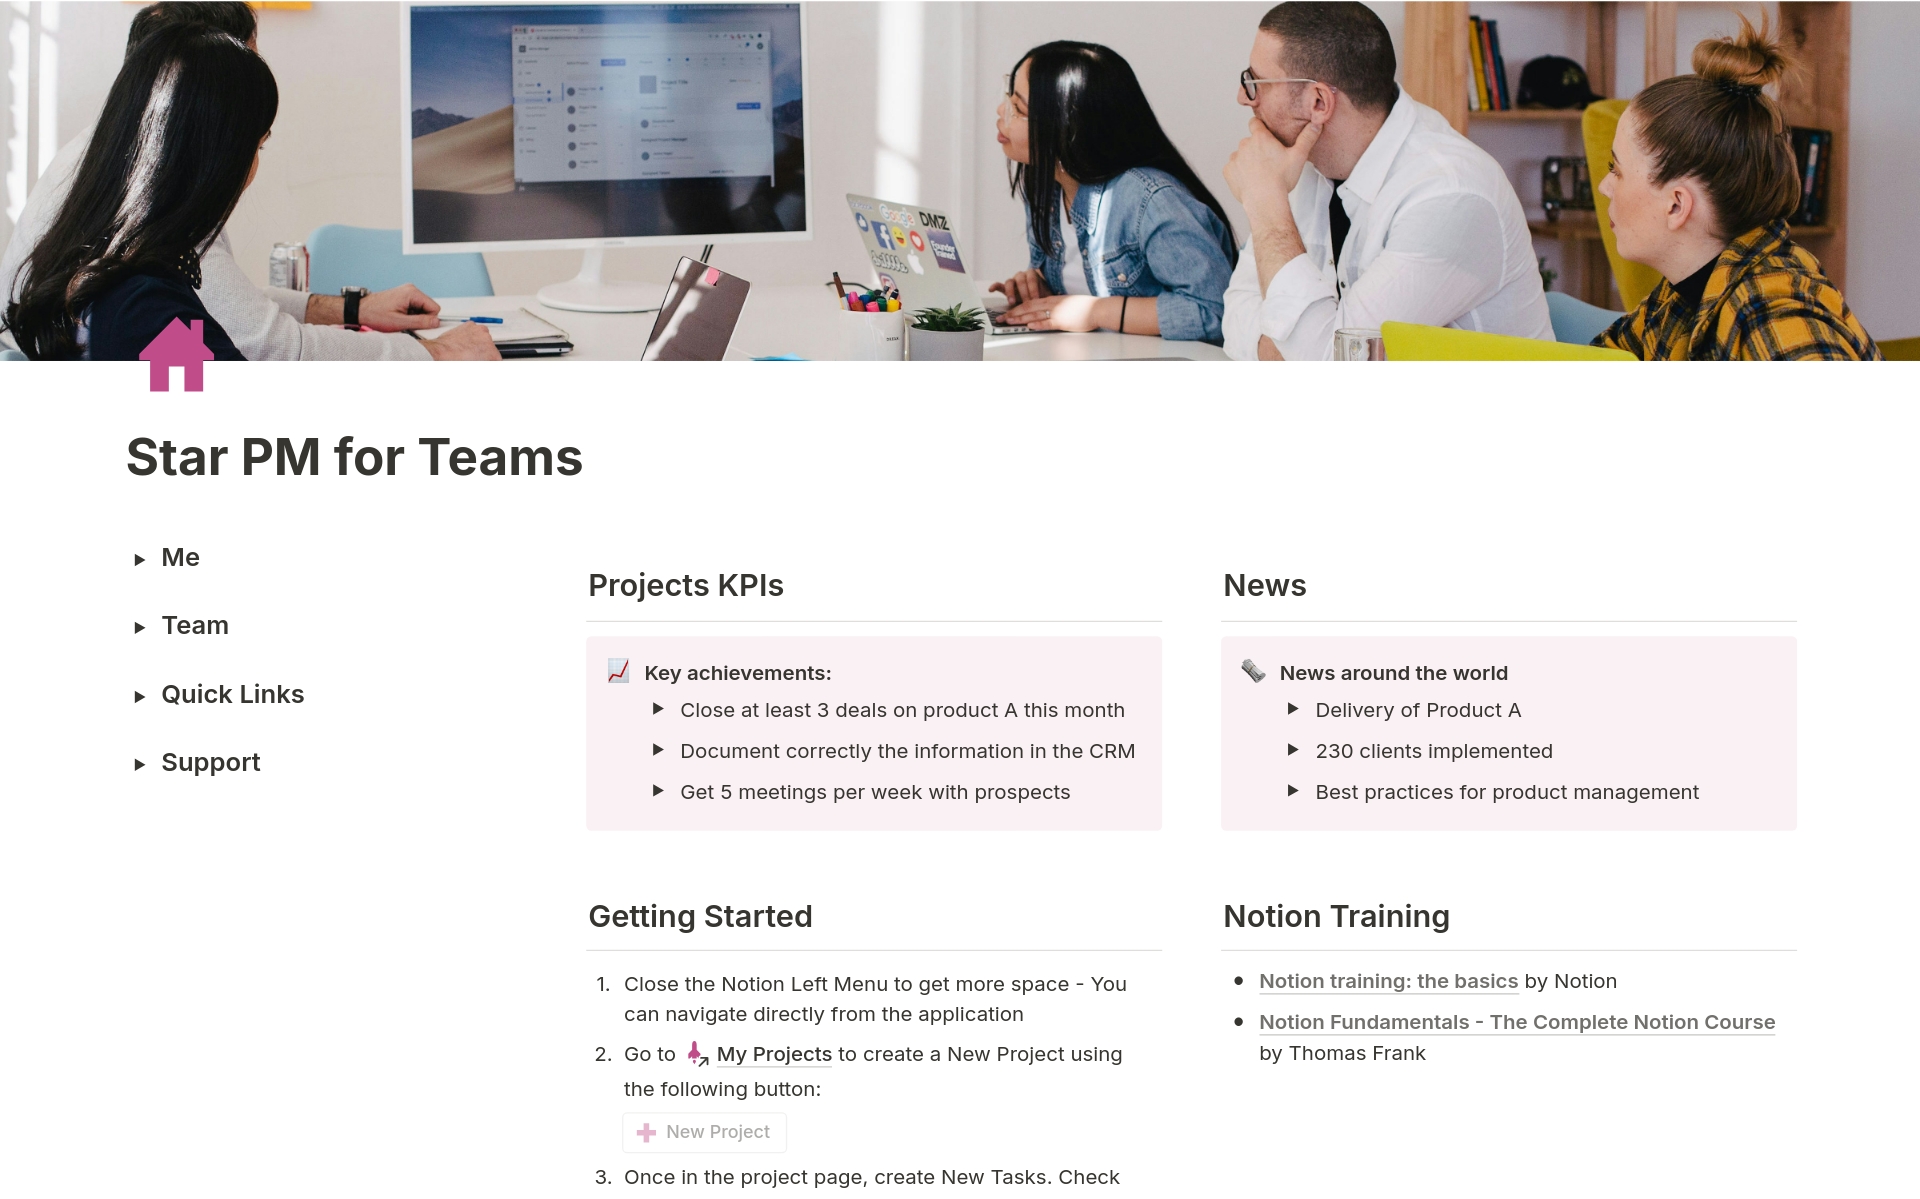 Star PM (Project Management) for Teamsのテンプレートのプレビュー